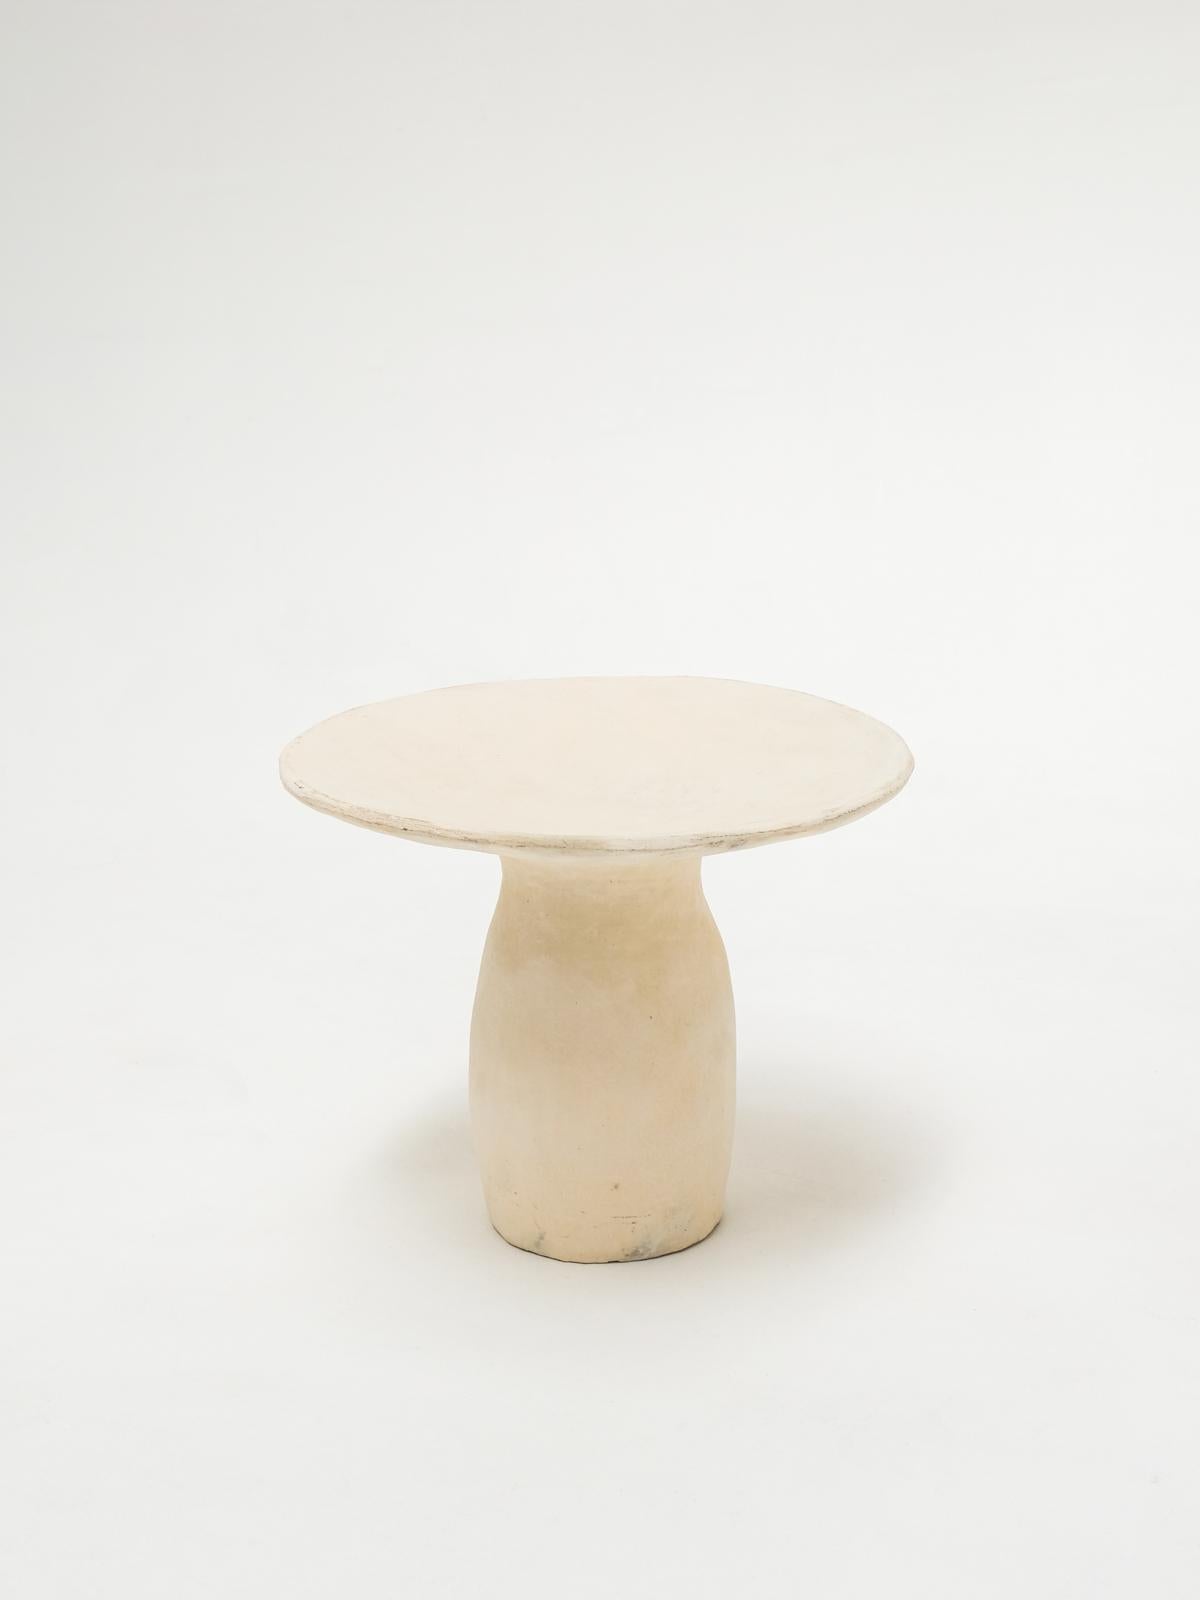 - Handbuilt white big side table, stool for bedroom or living room
- made of clay collected from the potter's surroundings.
- slip applied with natural pigments as whitewash with water
- made in the Moroccan Rif mountains by the potter Houda.
-